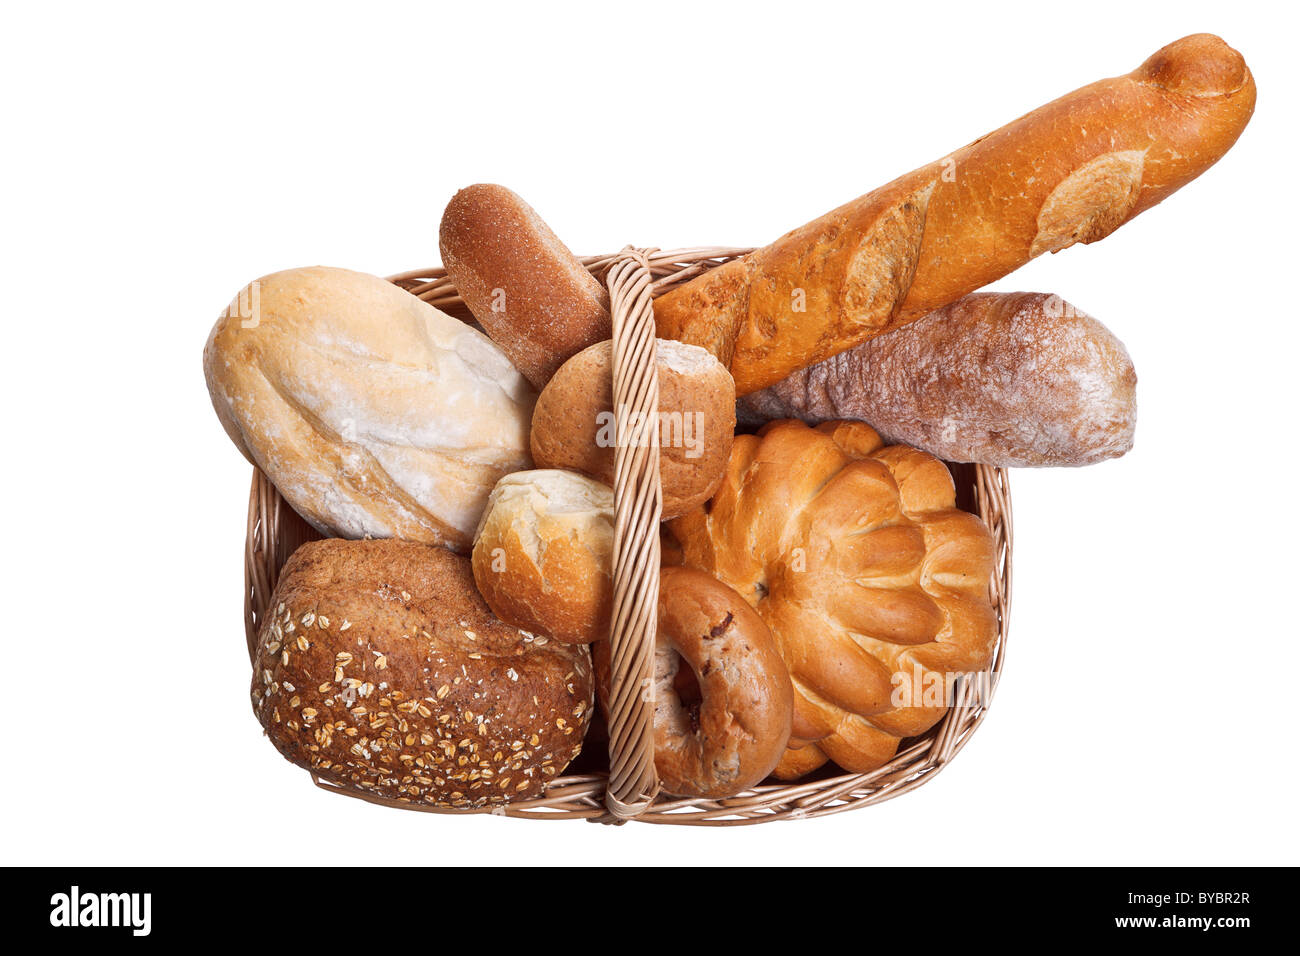 Photo of various types of bread in a wicker basket isolated on a white background. Stock Photo